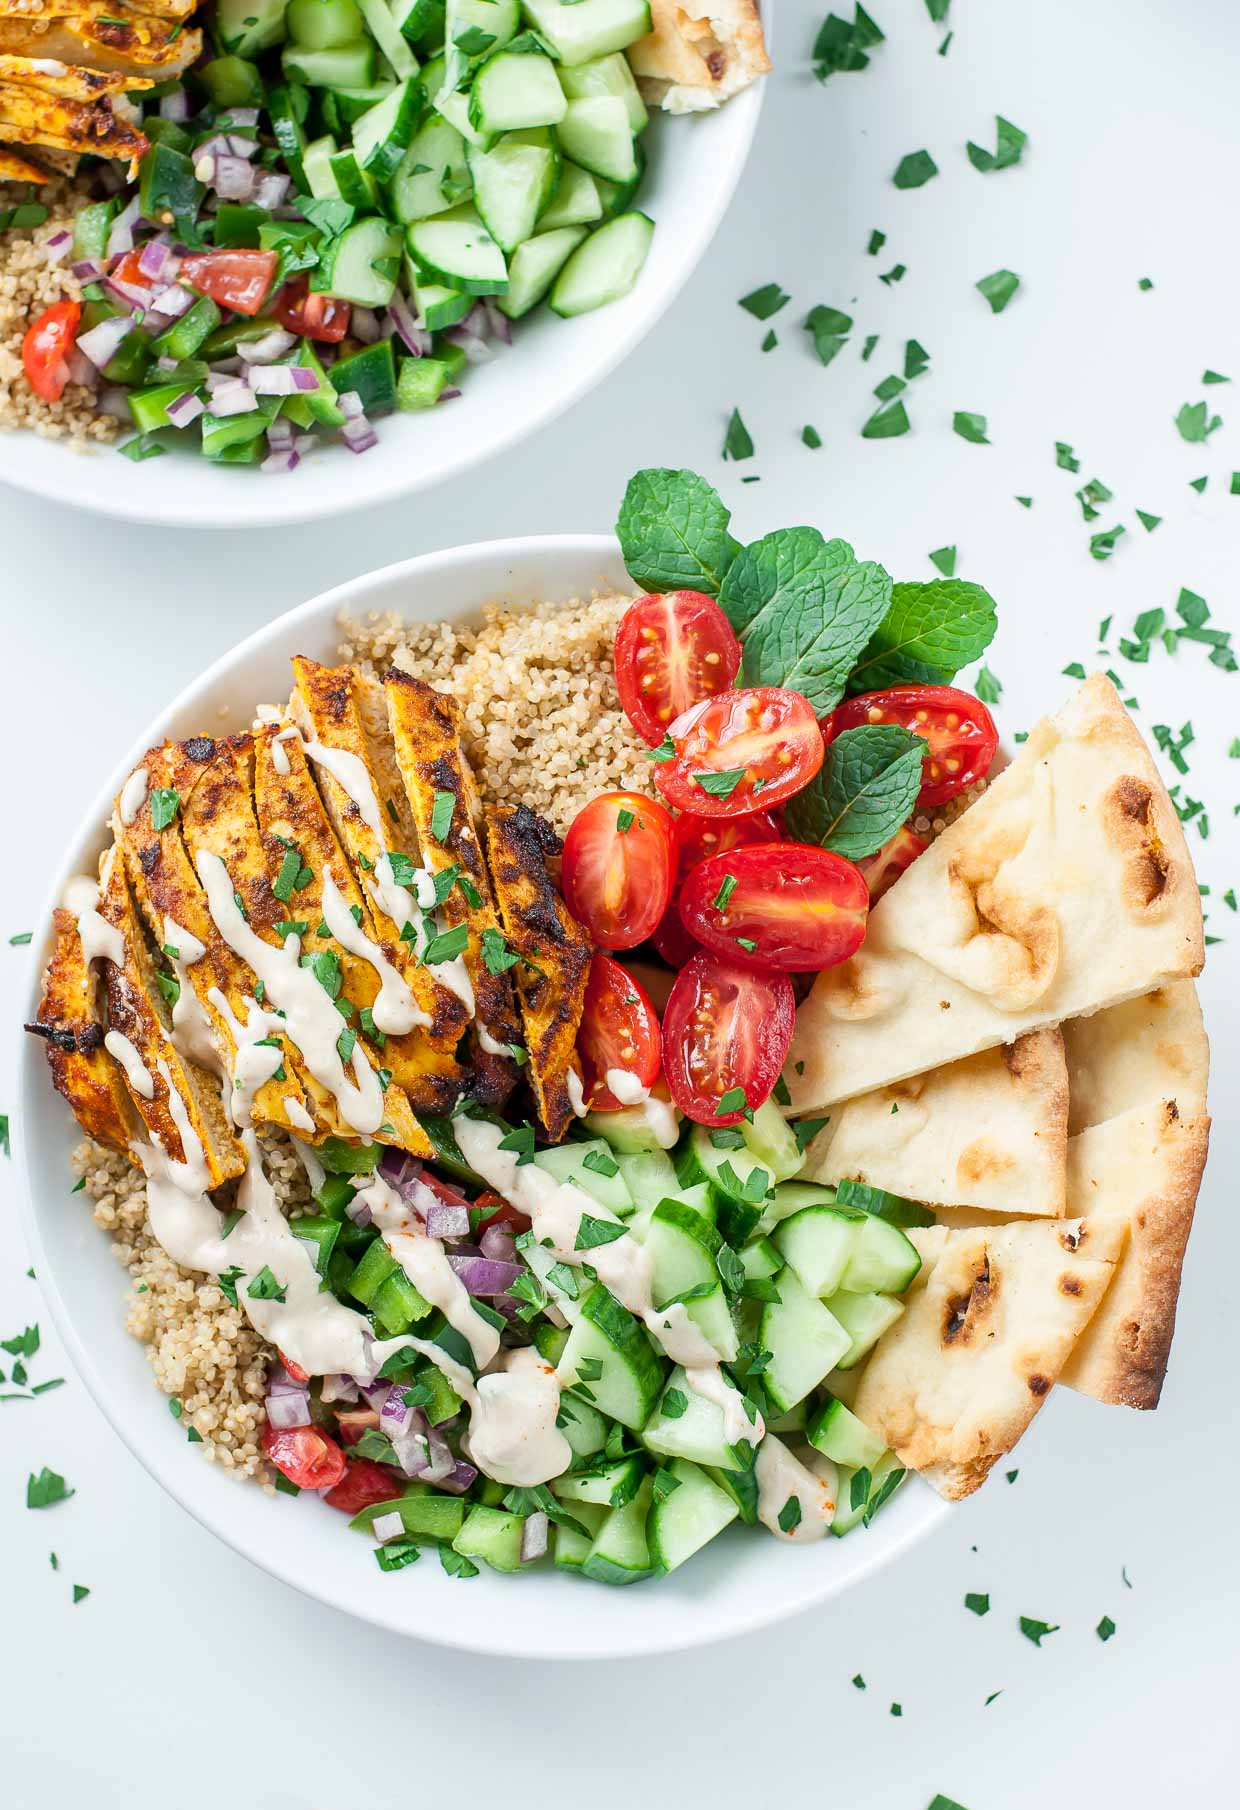 https://www.hikendip.com/wp-content/uploads/2020/01/Healthy-Chicken-Shawarma-Quinoa-Lunch-Bowls-by-Peas-and-Crayons.jpg